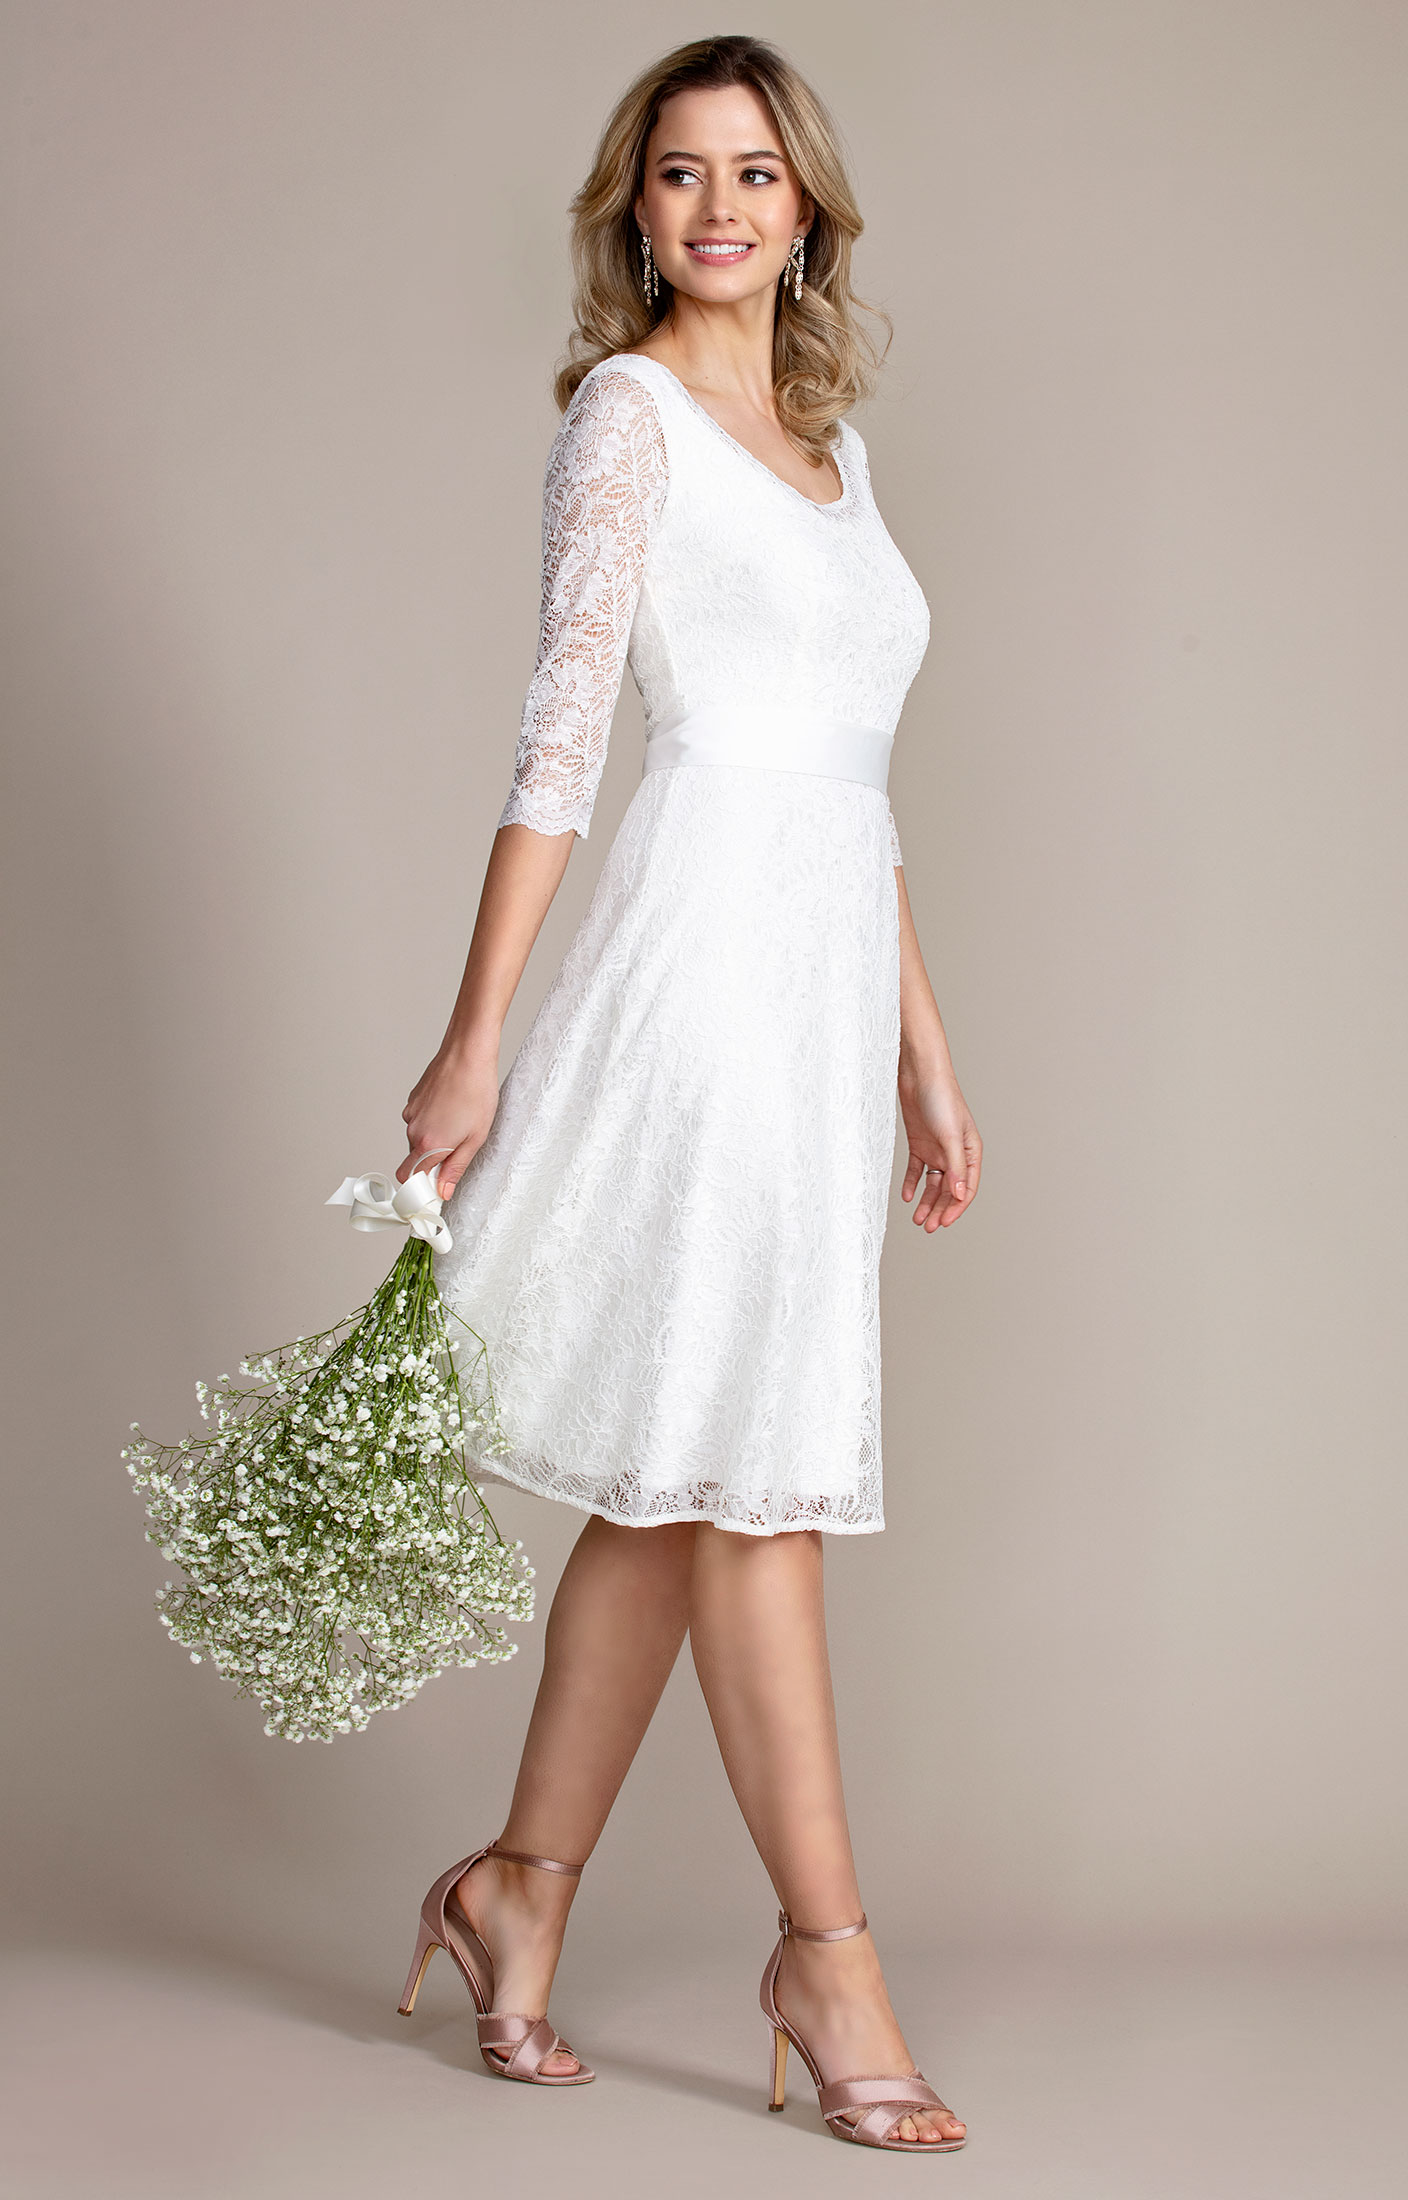 The perfect dress for your body shape - Belle et Blanc